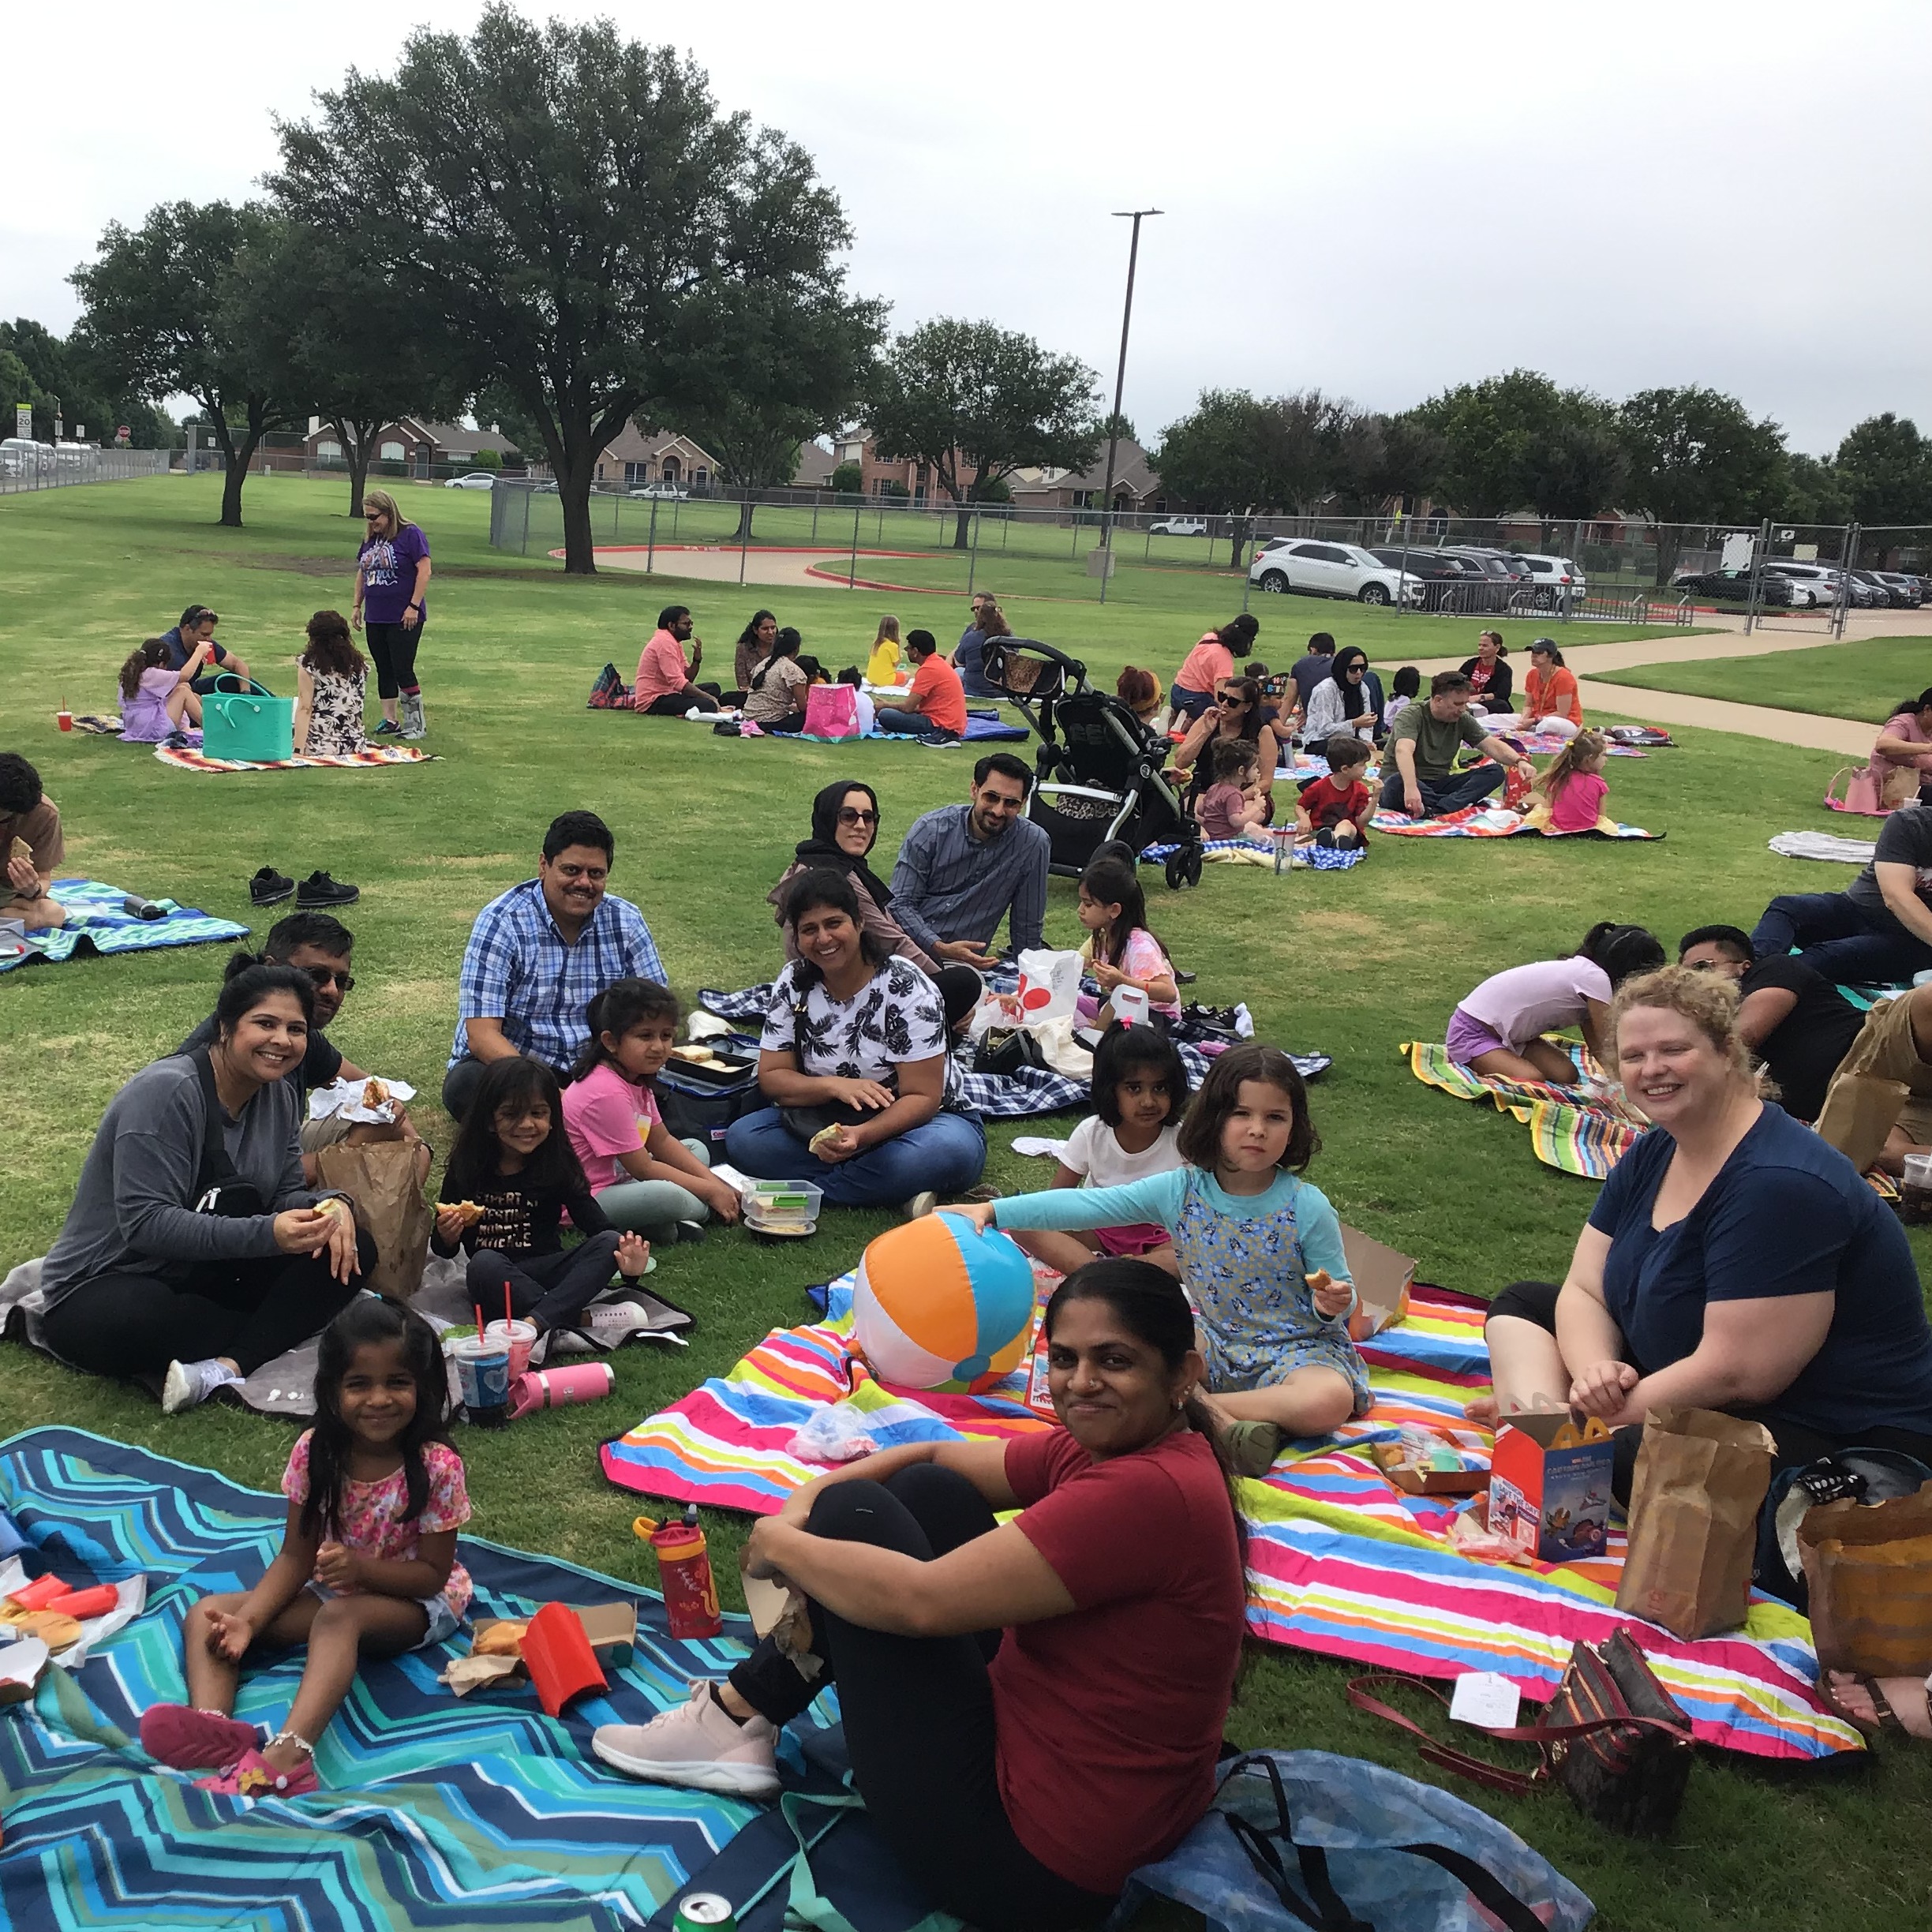 Group picture of families enjoying lunch at the family picnic